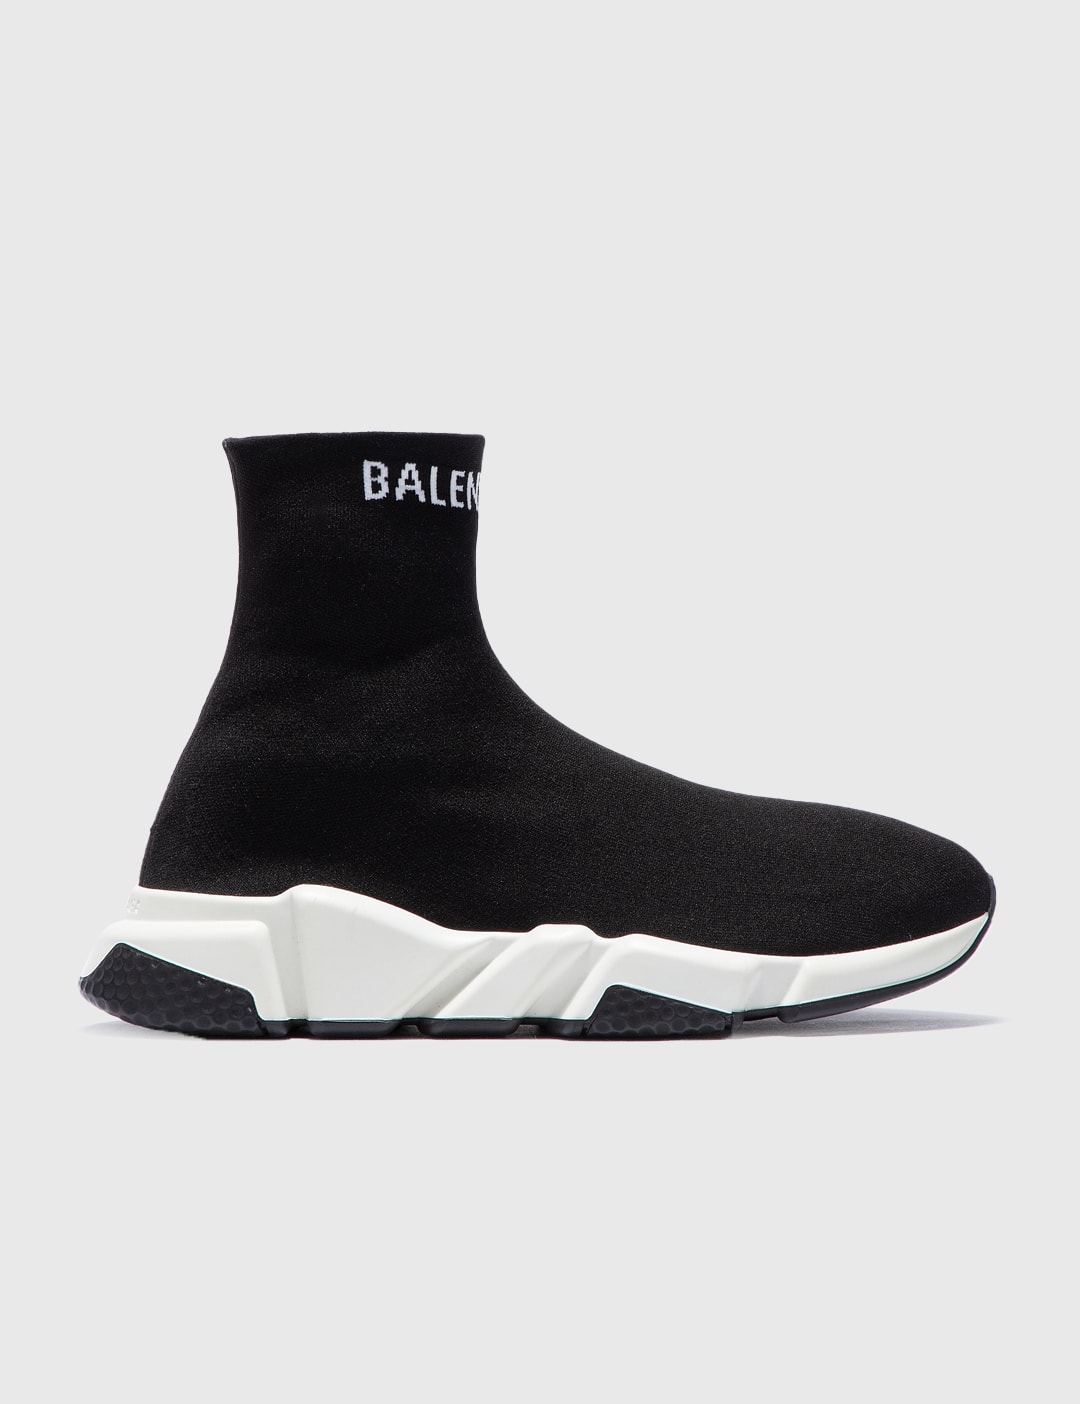 New Colorways Of The Balenciaga Speed Trainer Are Available Now For  Pre-Order 